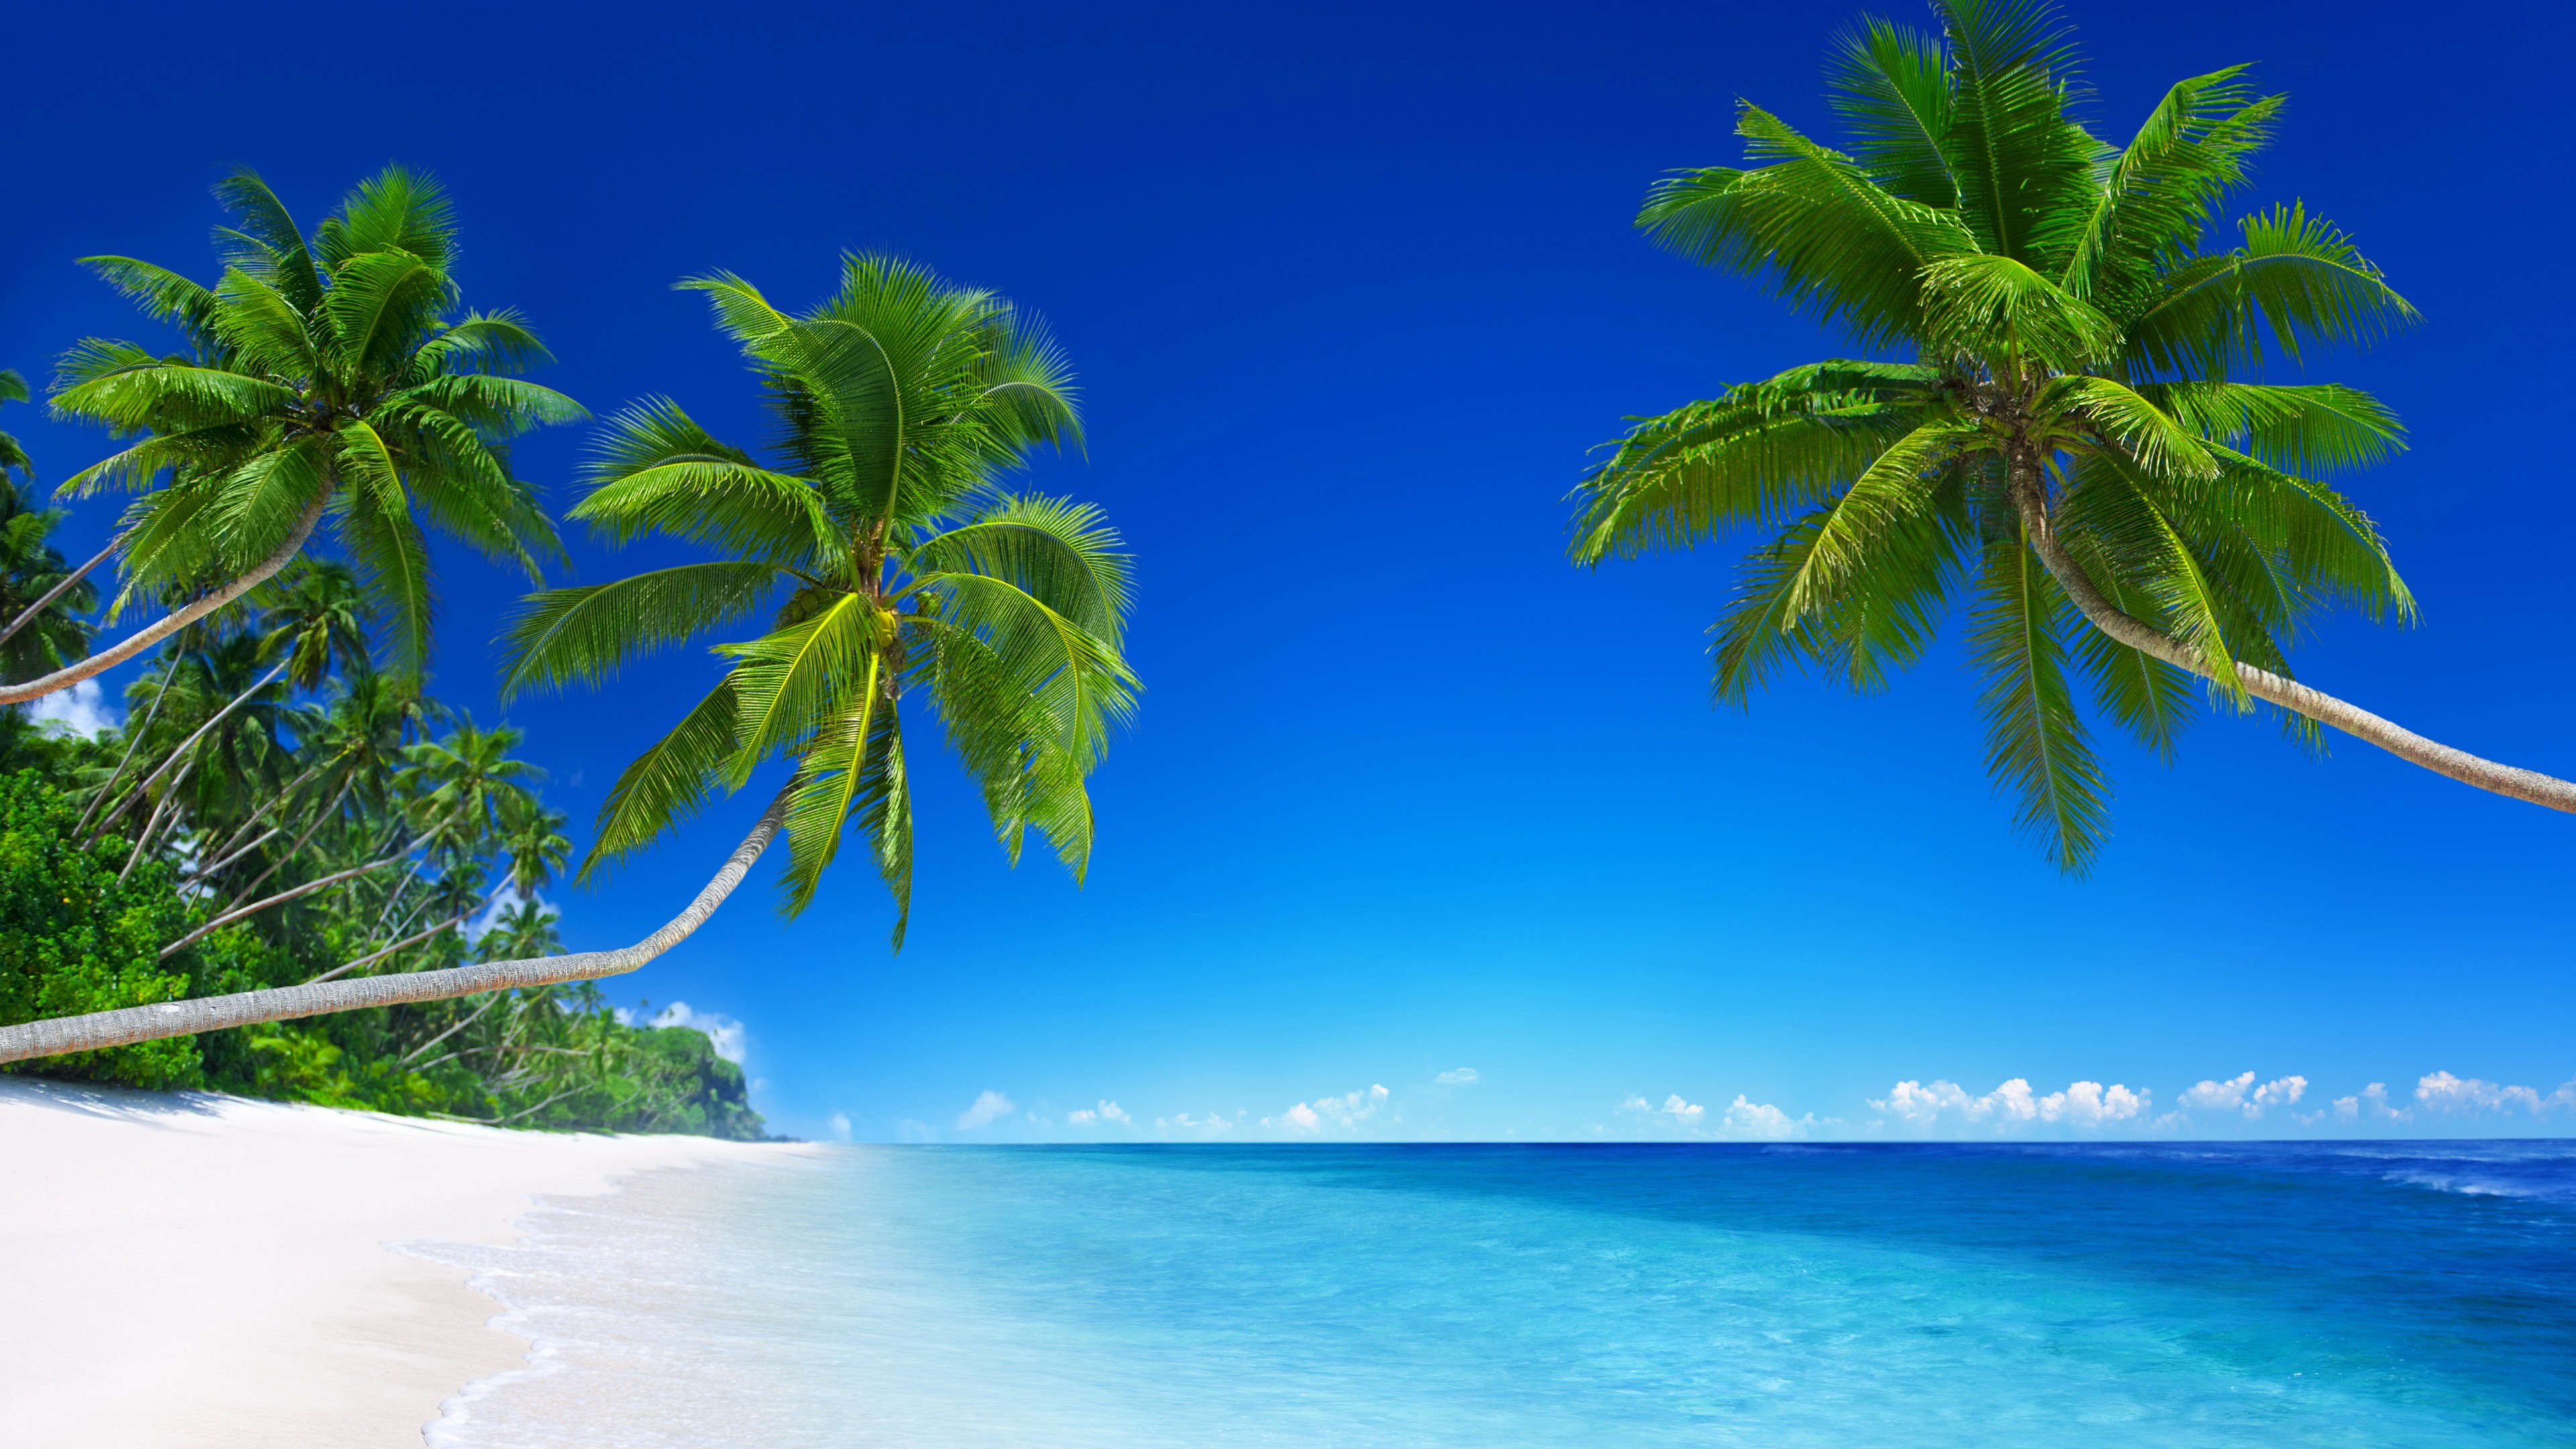 3840x2160 Tropical beach nature ultra hd 4k wallpapers download free